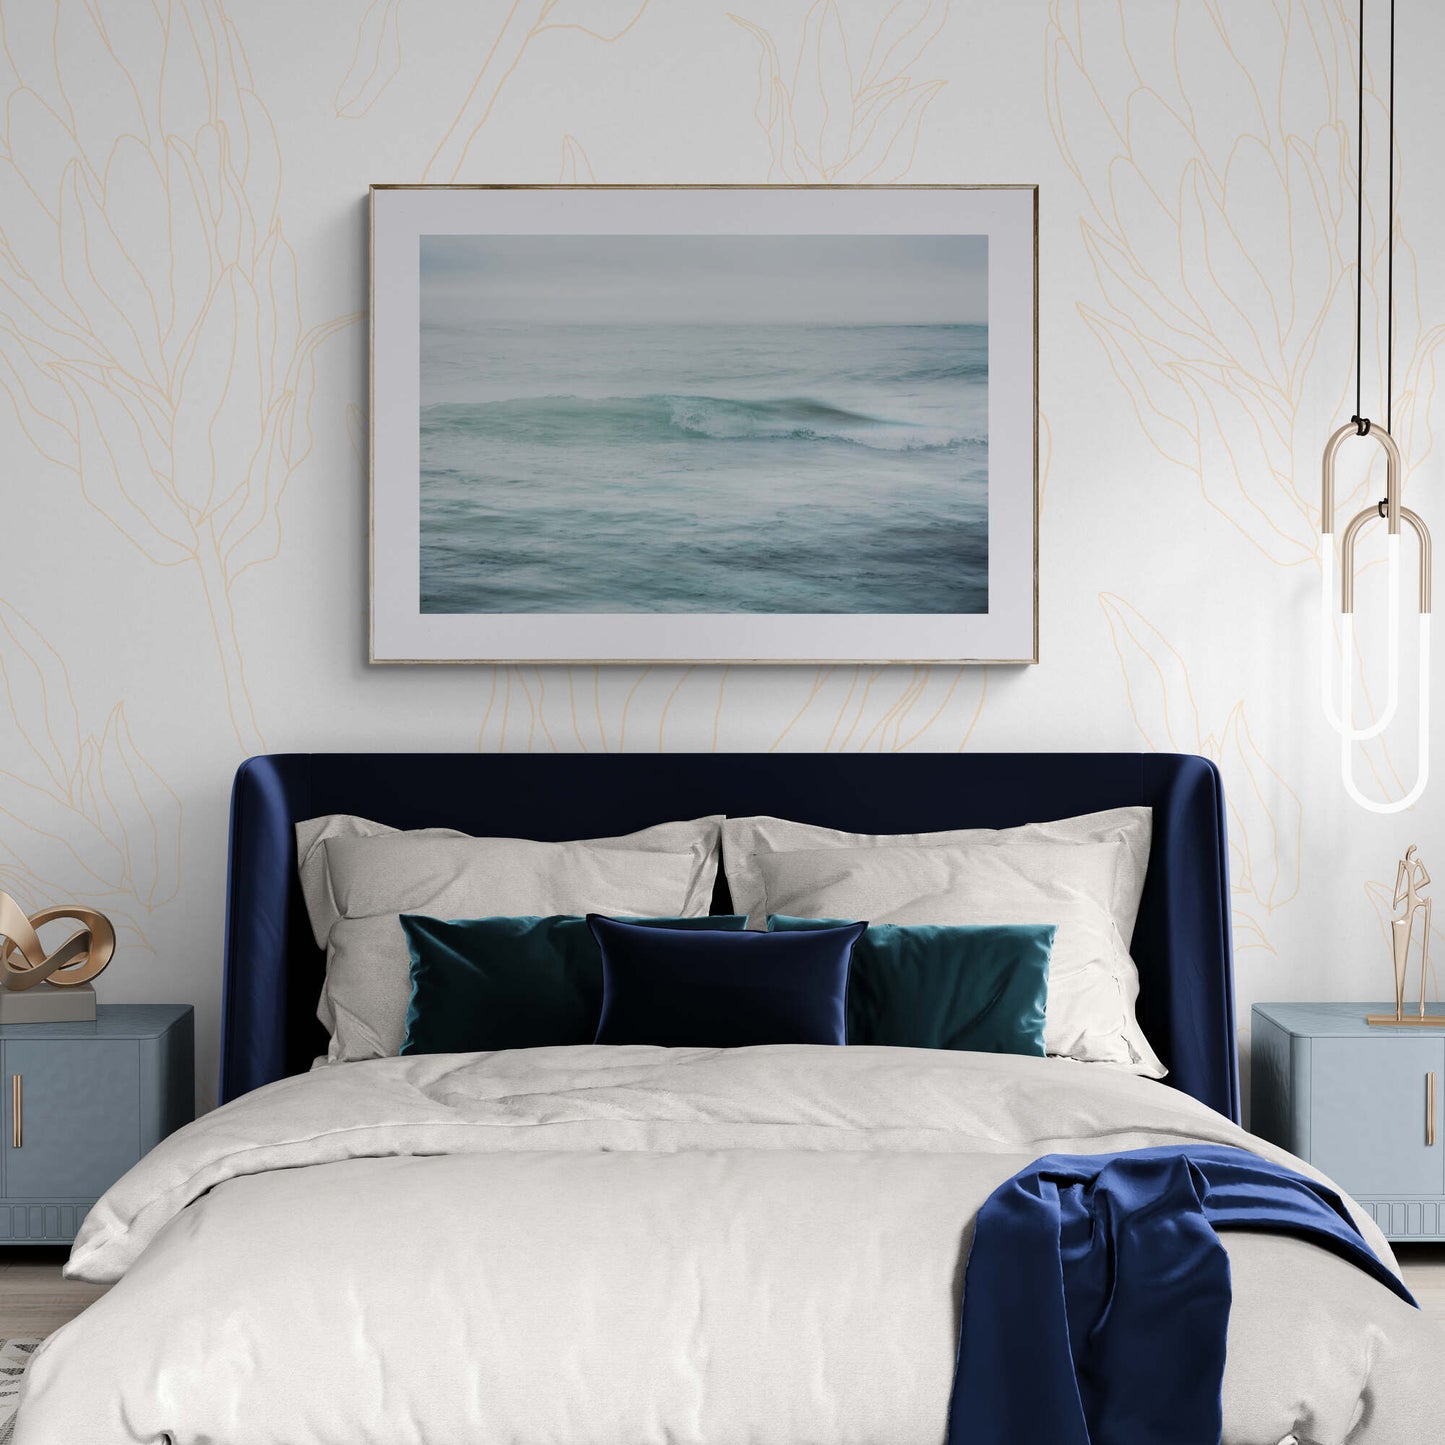 Photograph of Ocean Wave as Wall Art in a Bedroom